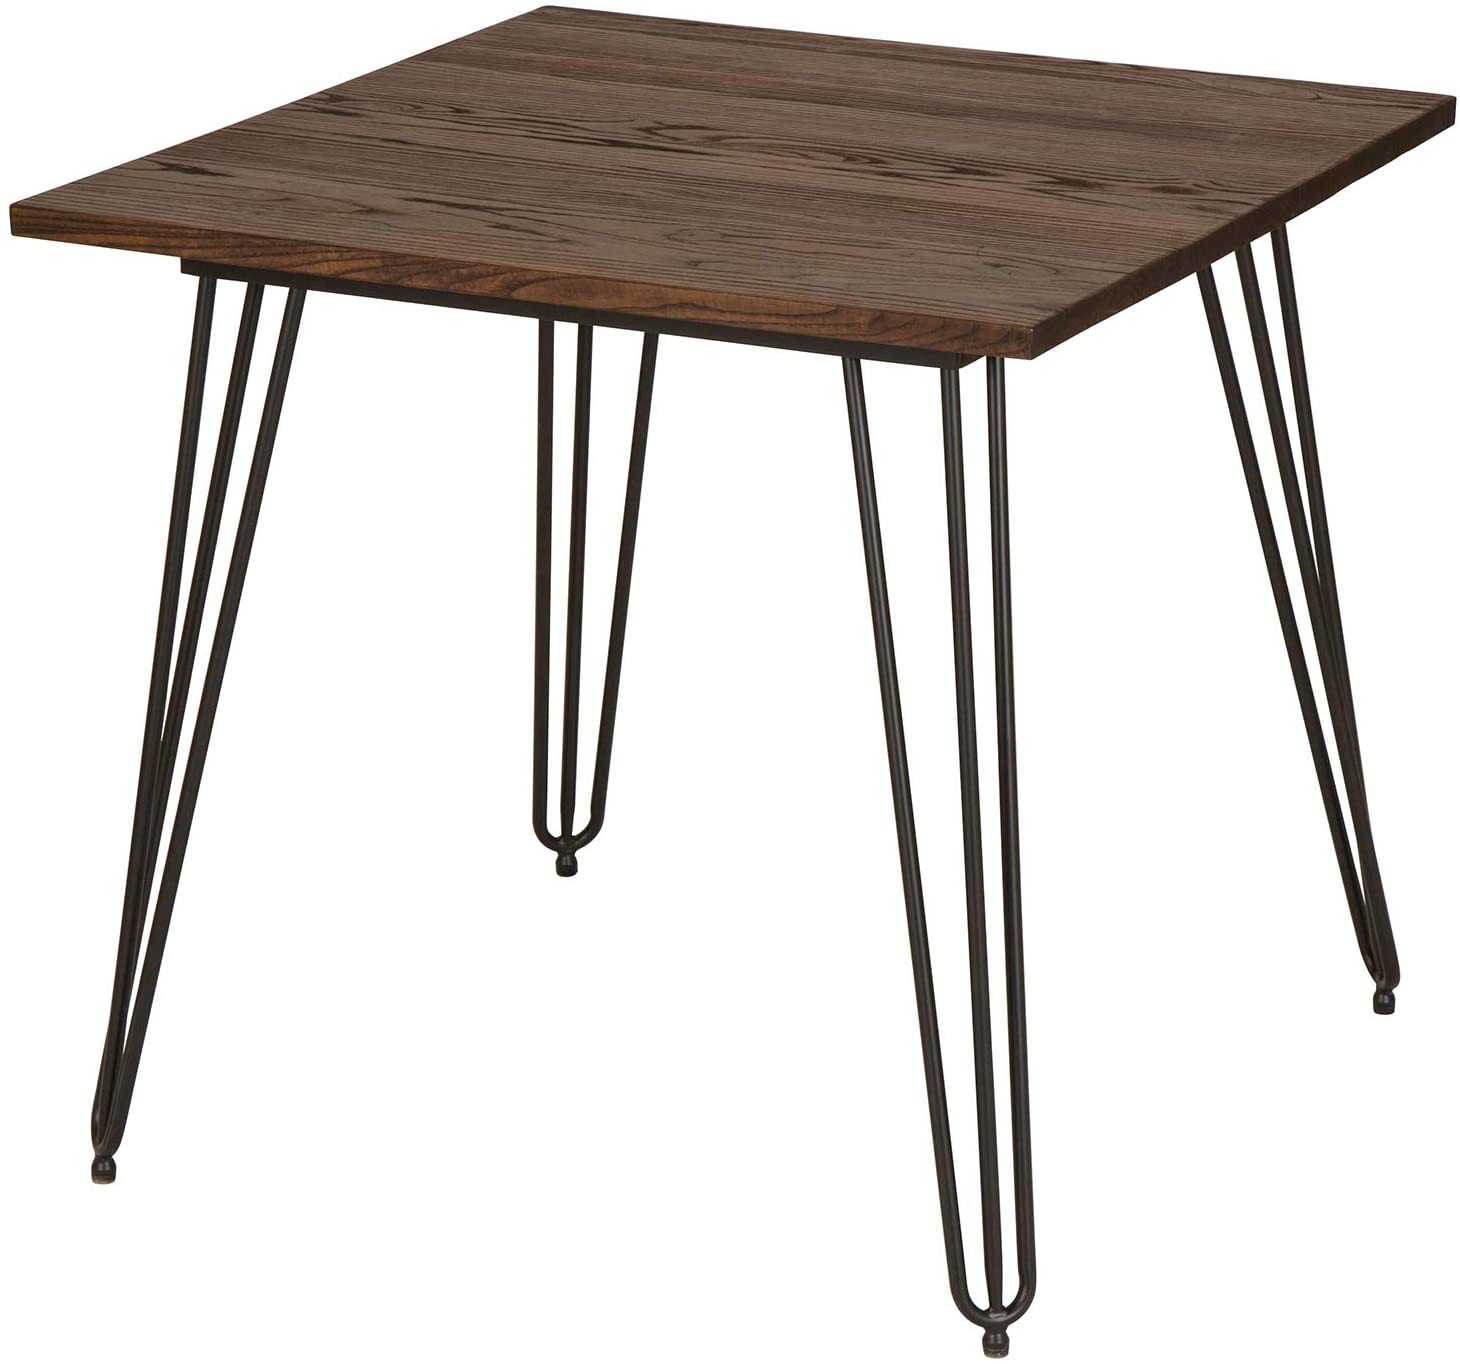 B089GKMKWY Glitzhome Industrial Style Dining Table Mid Century Square Kitchen Table w/Wood Tabletop Metal Frame 31.5 Inch Leisure Table for Home Office Dining Room